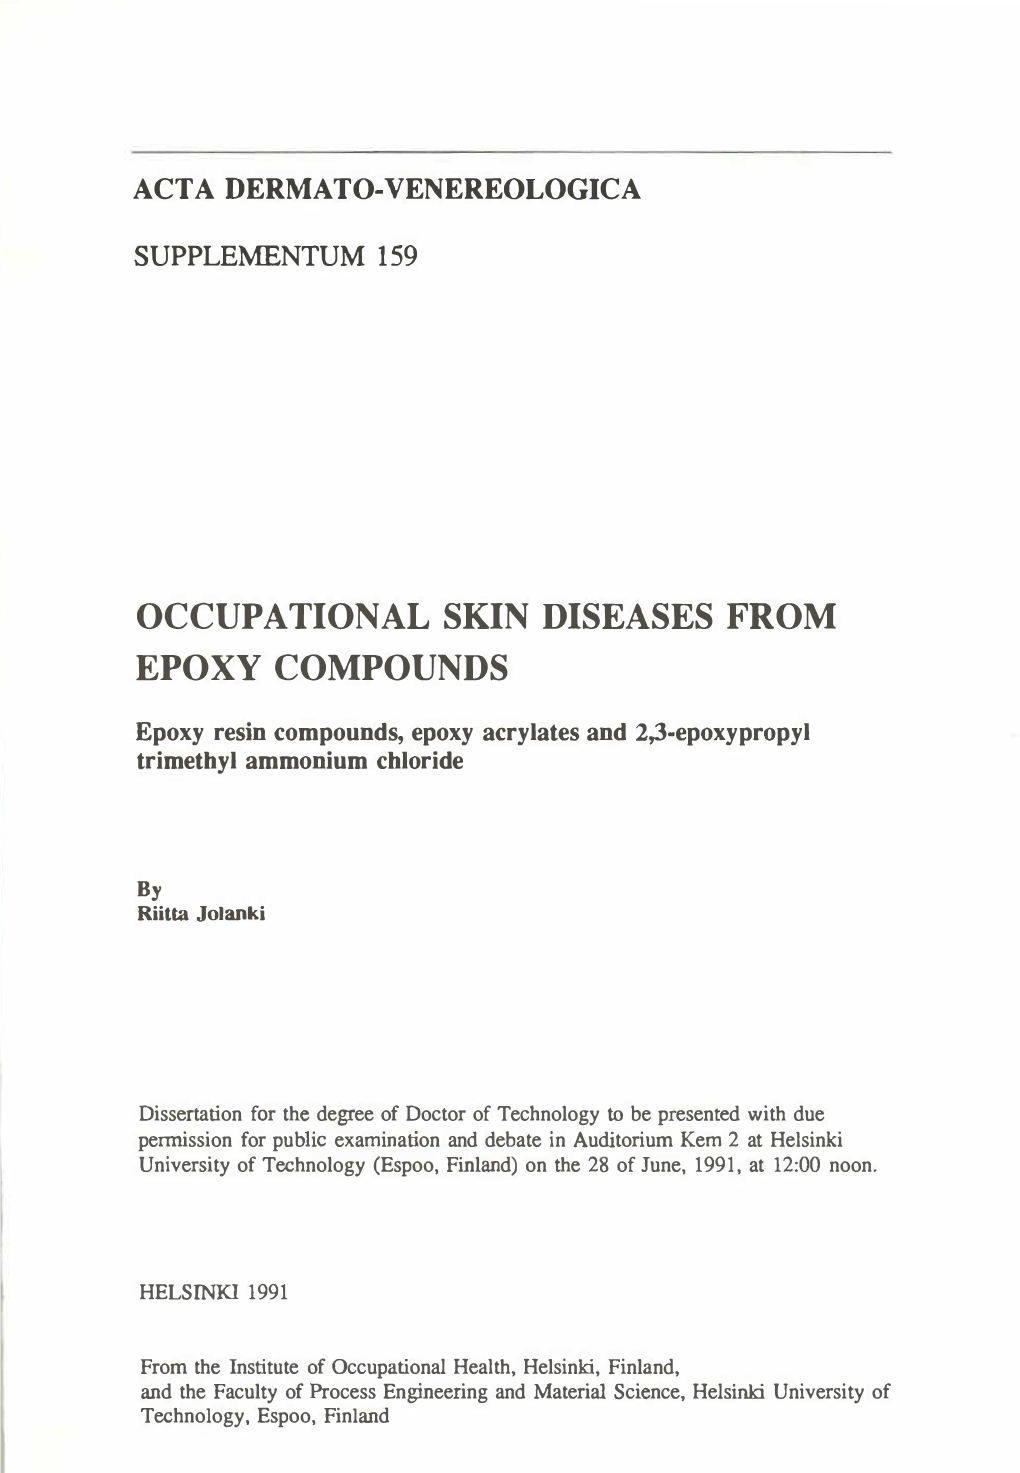 Occupational Skin Diseases from Epoxy Compounds